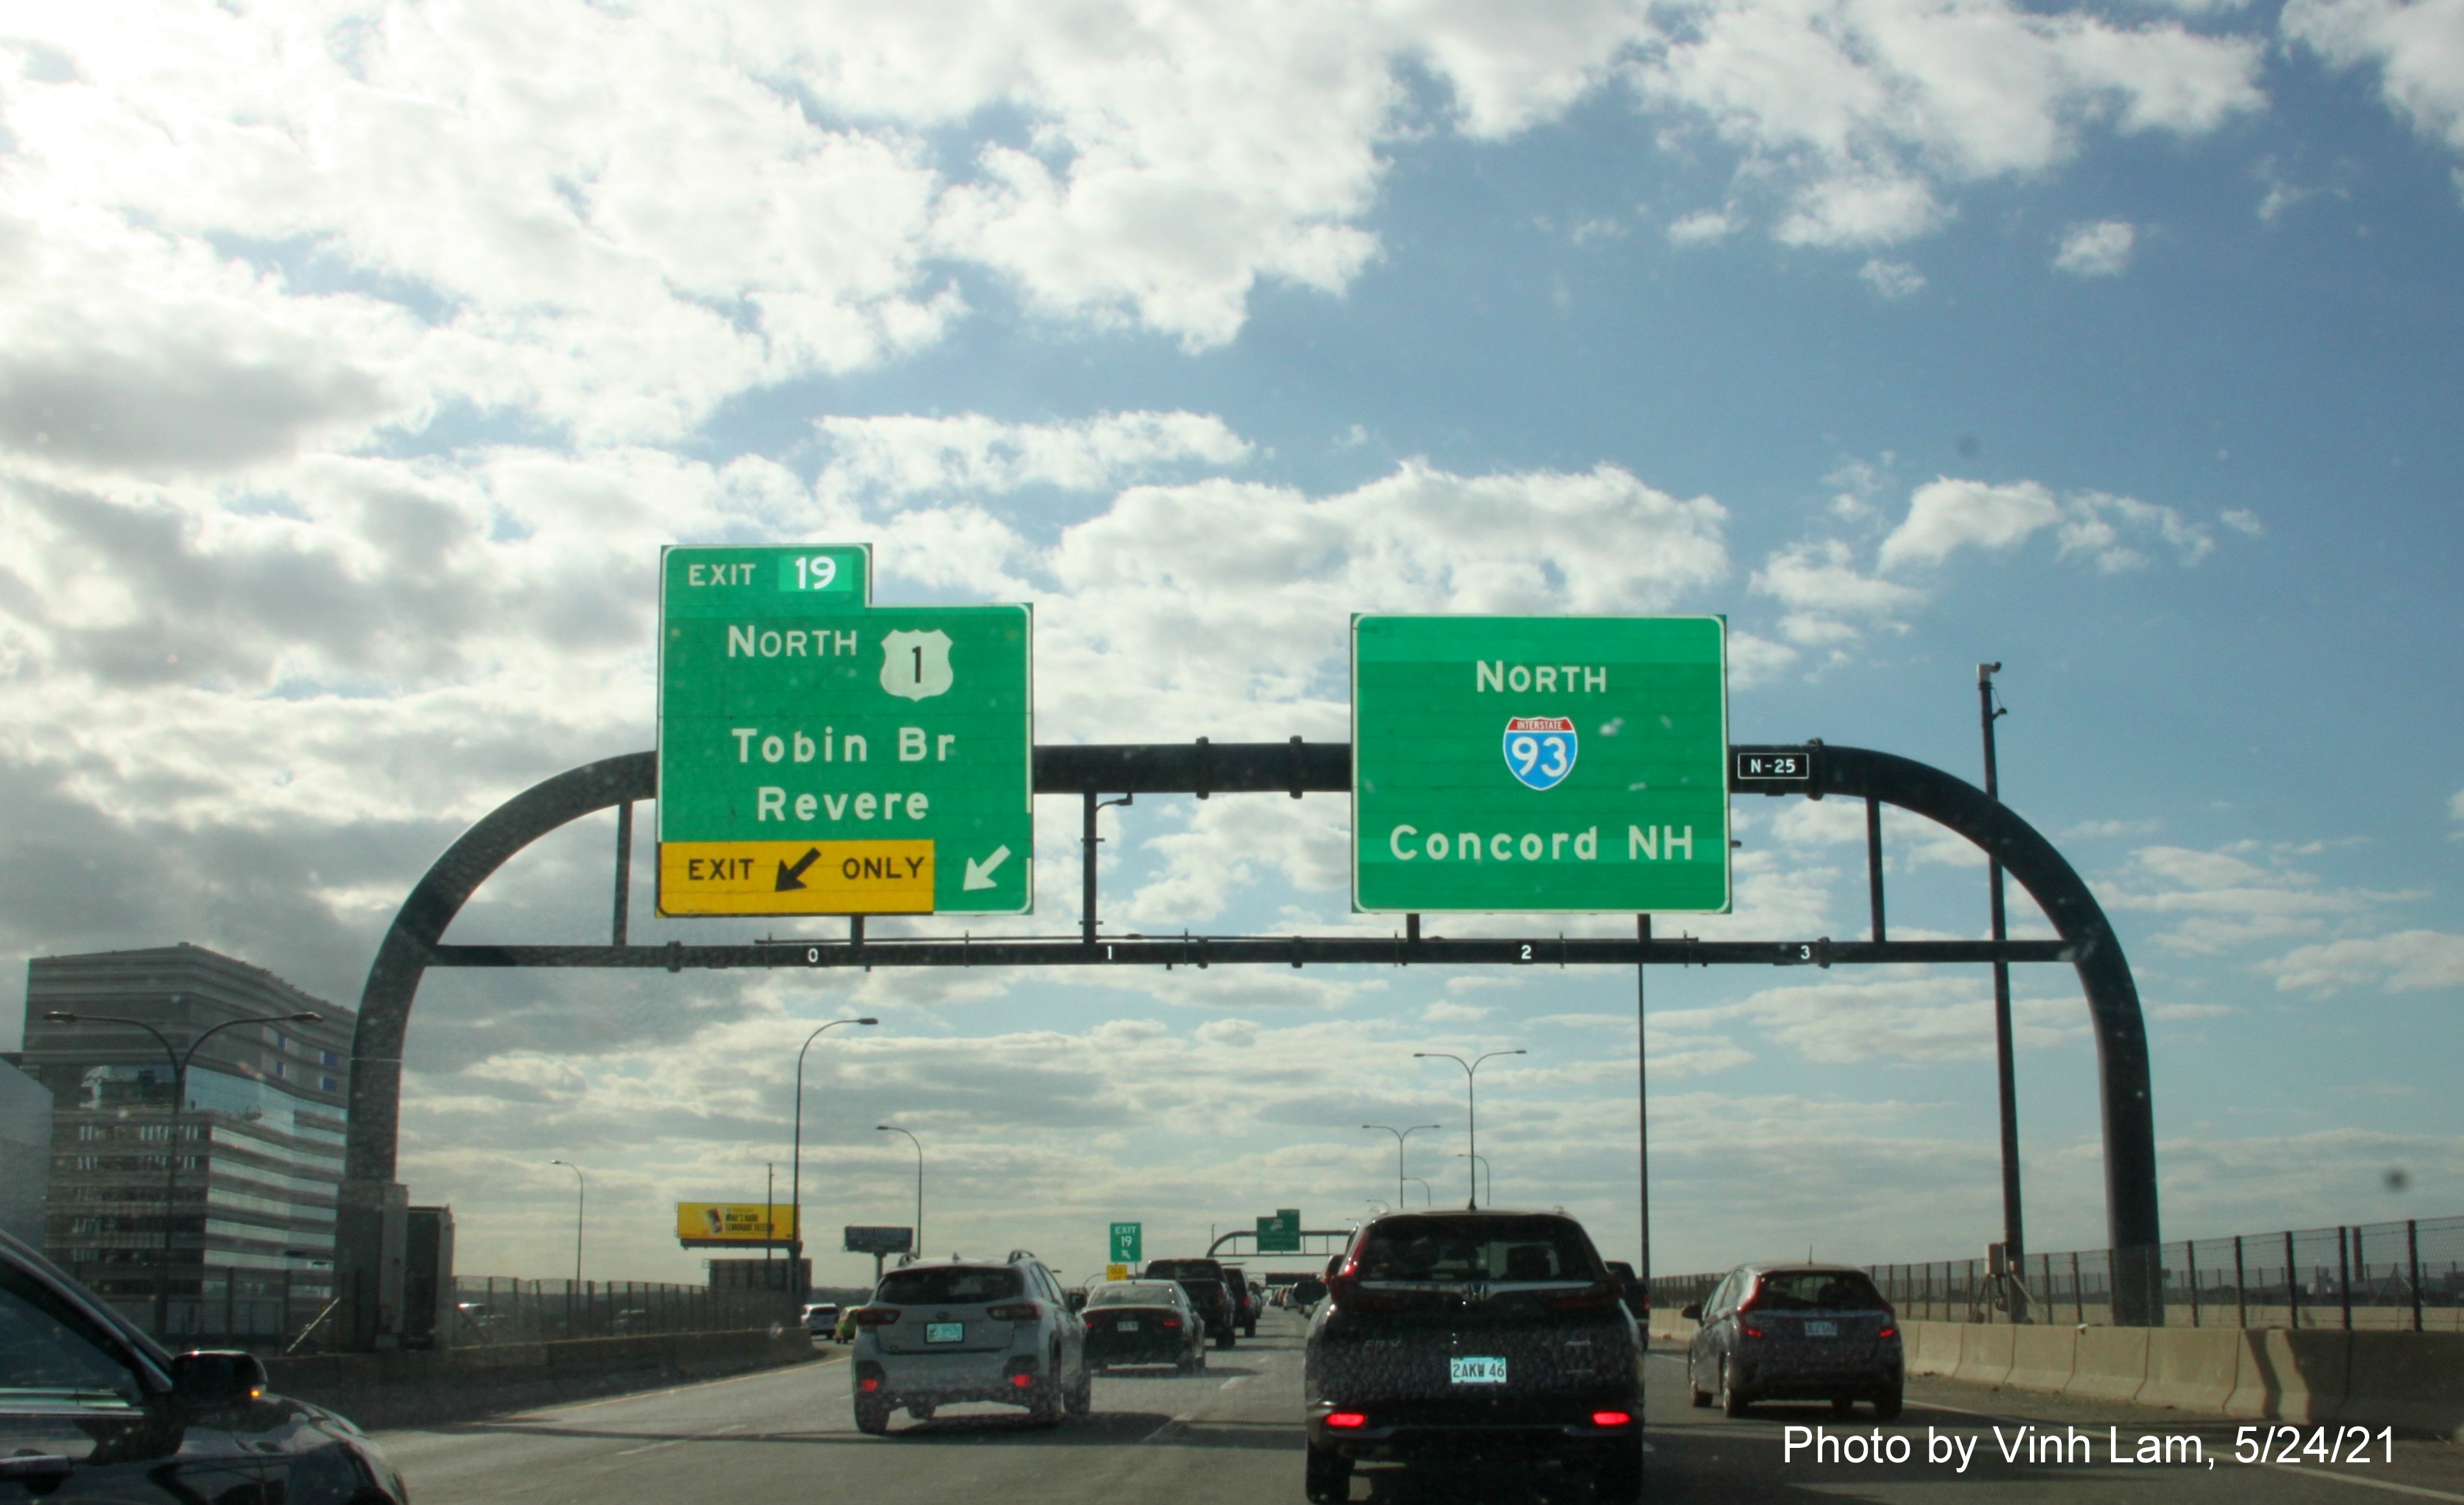 Image of overhead ramp sign for US 1/Tobin Bridge exit with new milepost based exit number on I-93 North in Charlestown, by Vinh Lam, May 2021